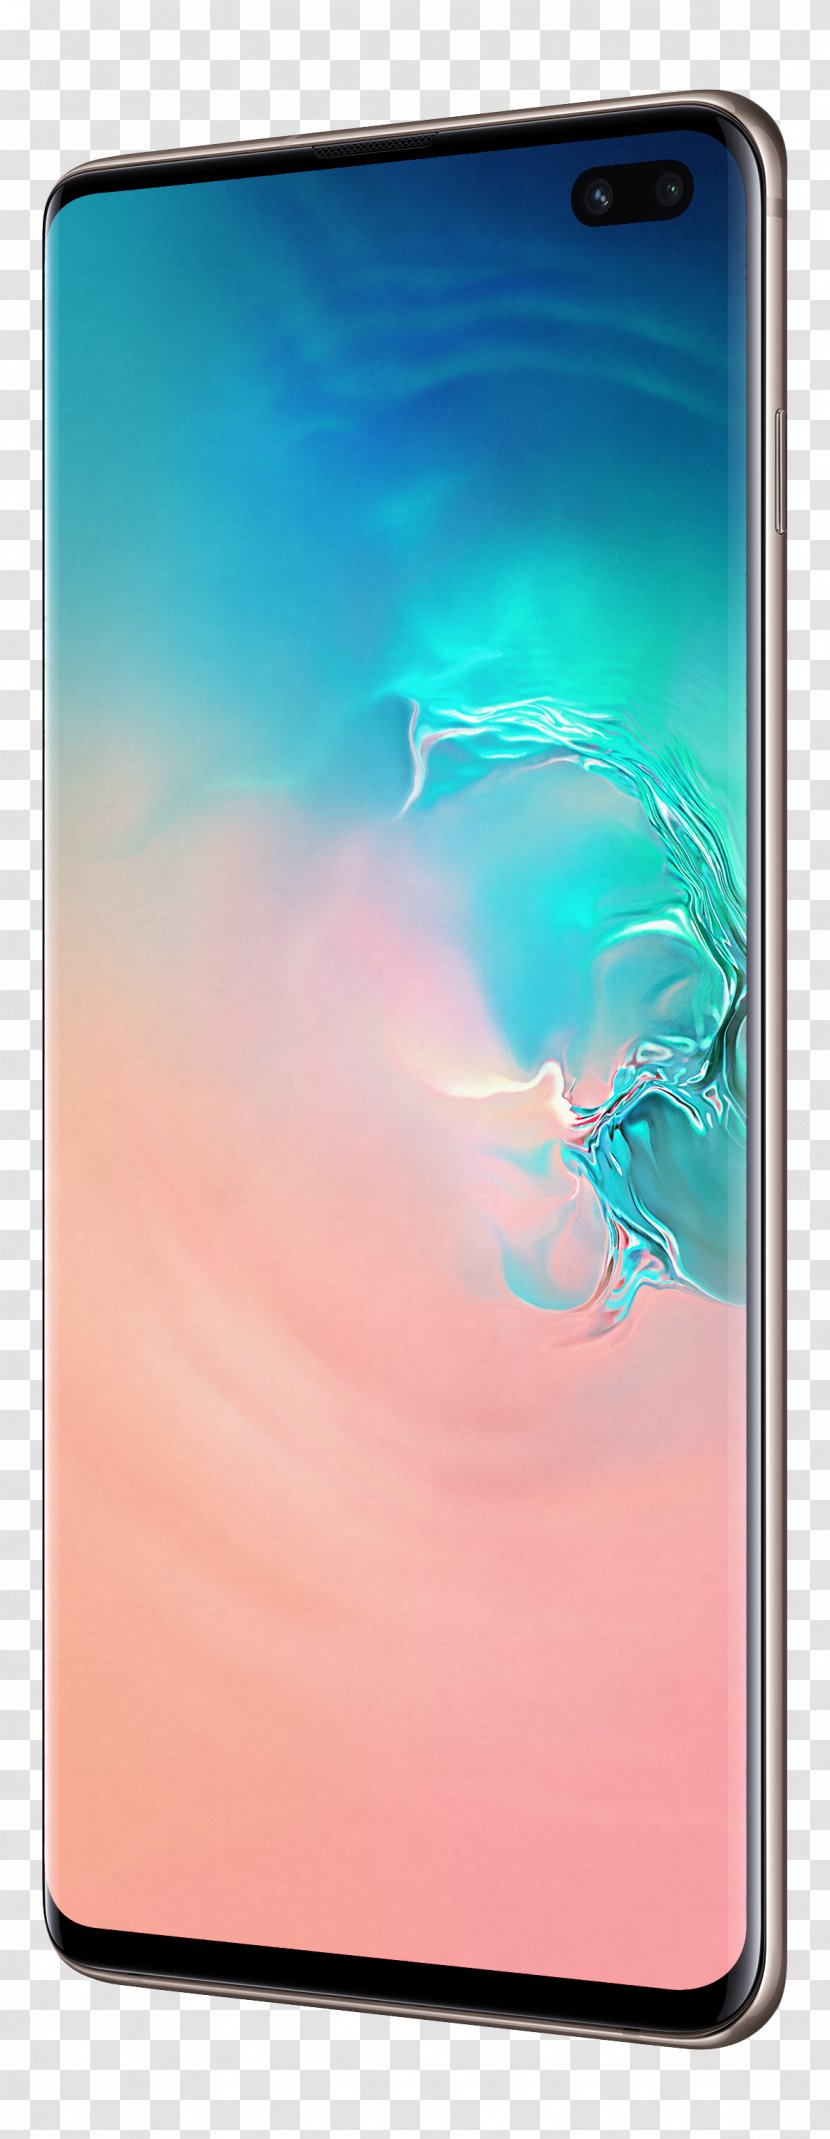 Samsung Galaxy Note 8 S10+ S9 - Mobile Phones - Sky Turquoise Transparent PNG